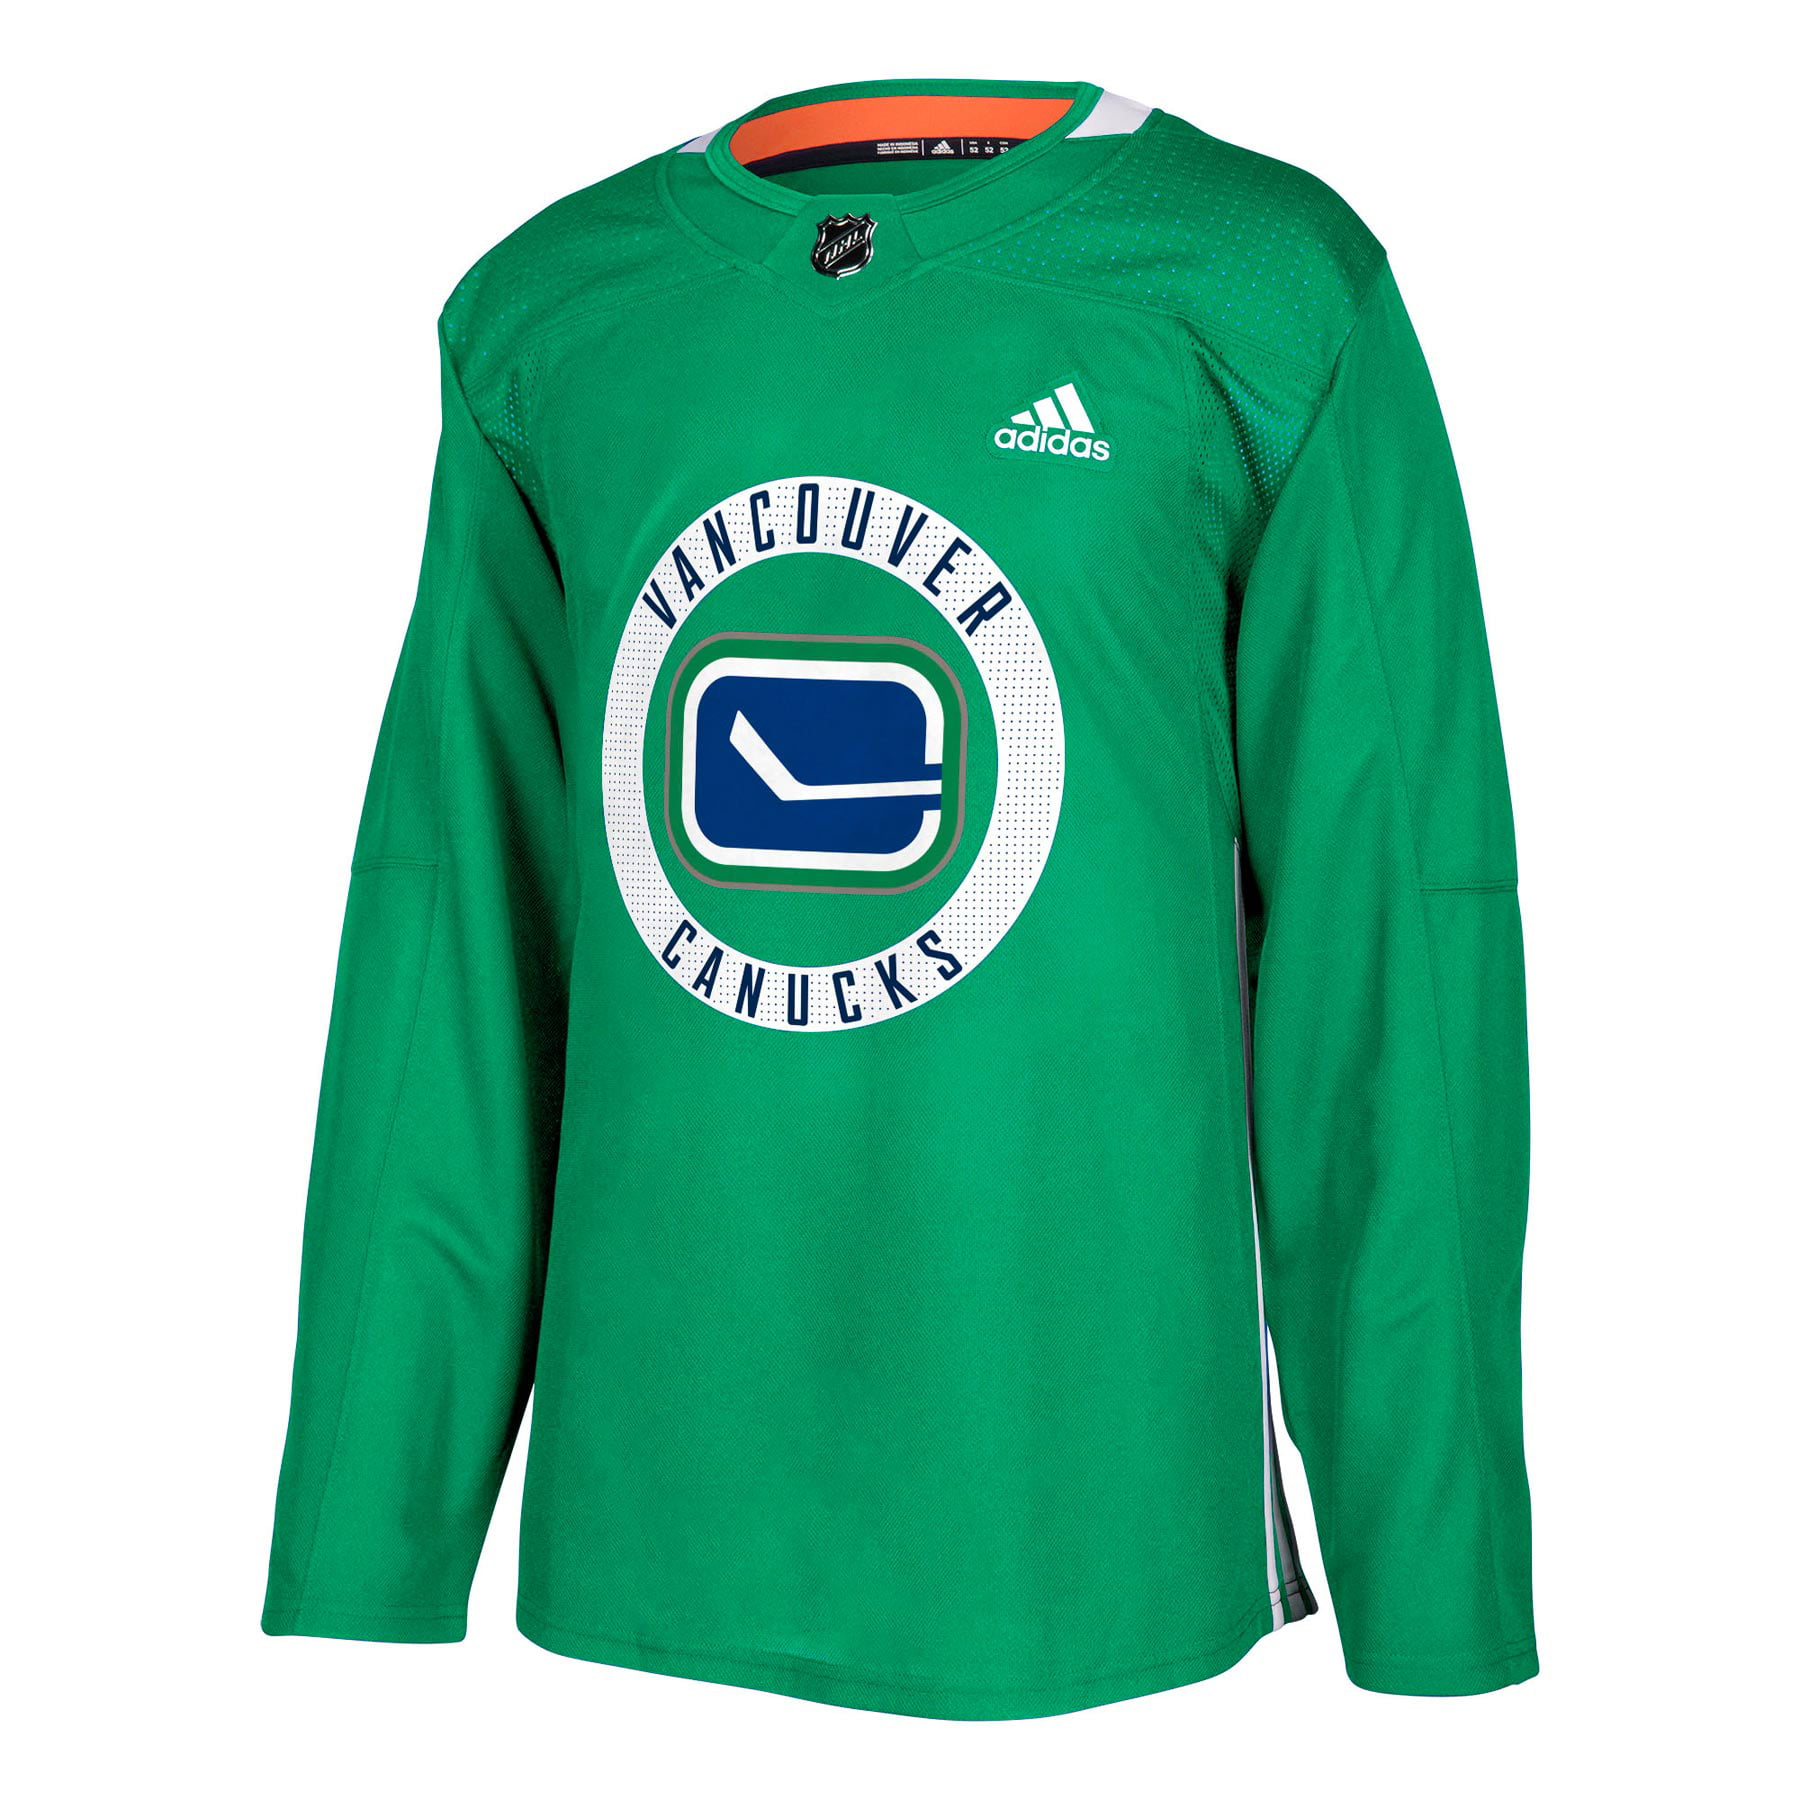 vancouver canucks adidas jersey